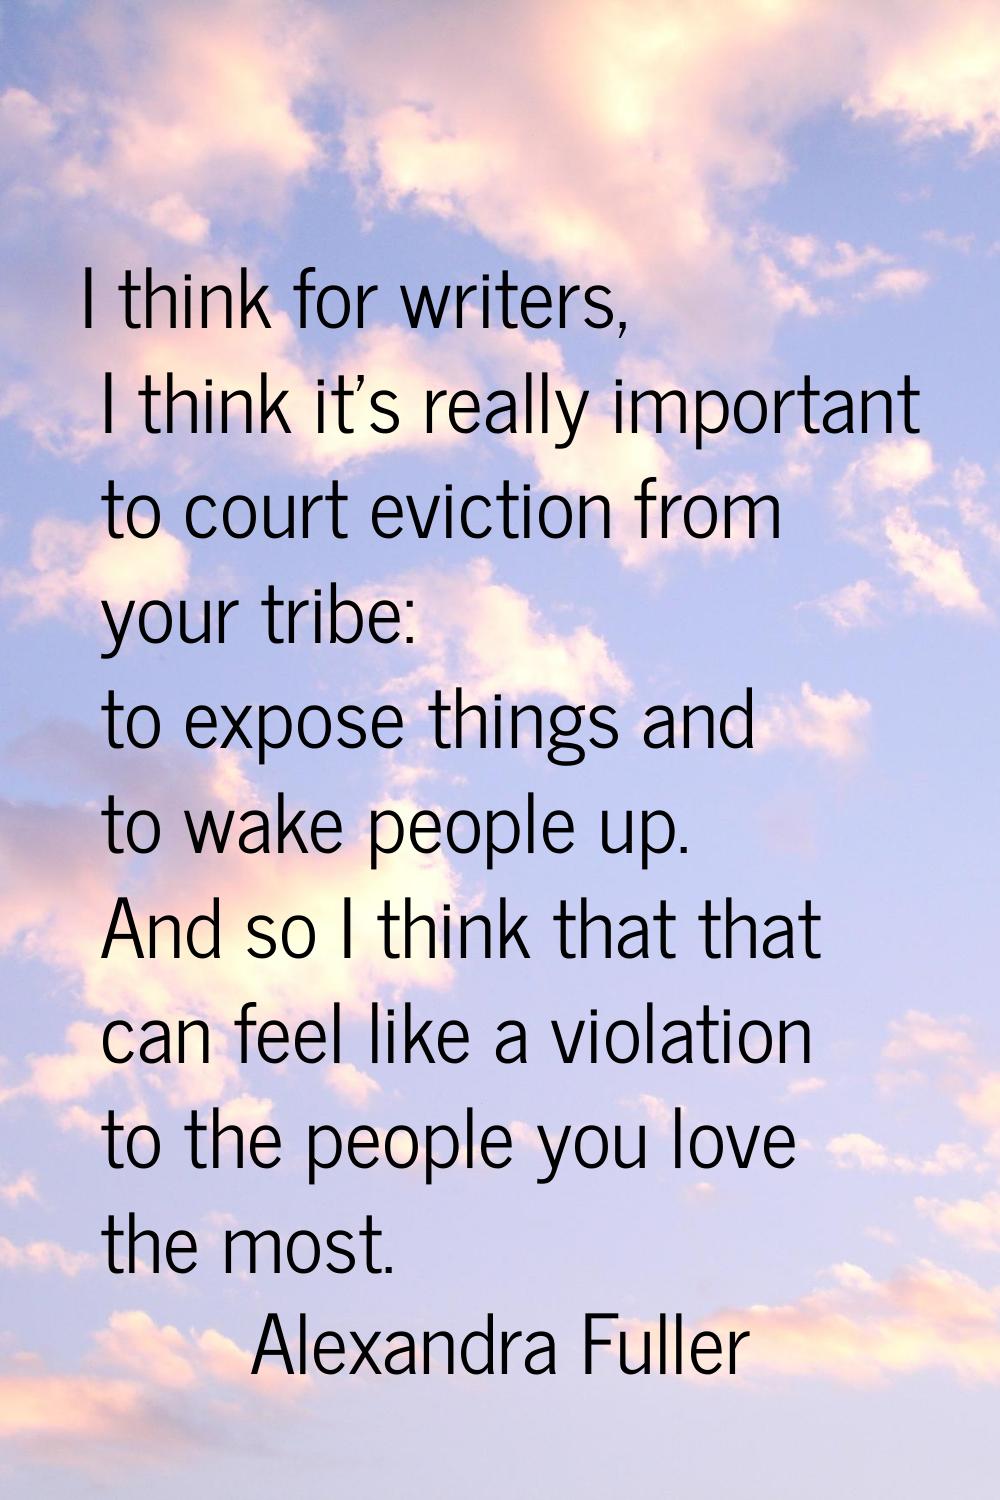 I think for writers, I think it's really important to court eviction from your tribe: to expose thi